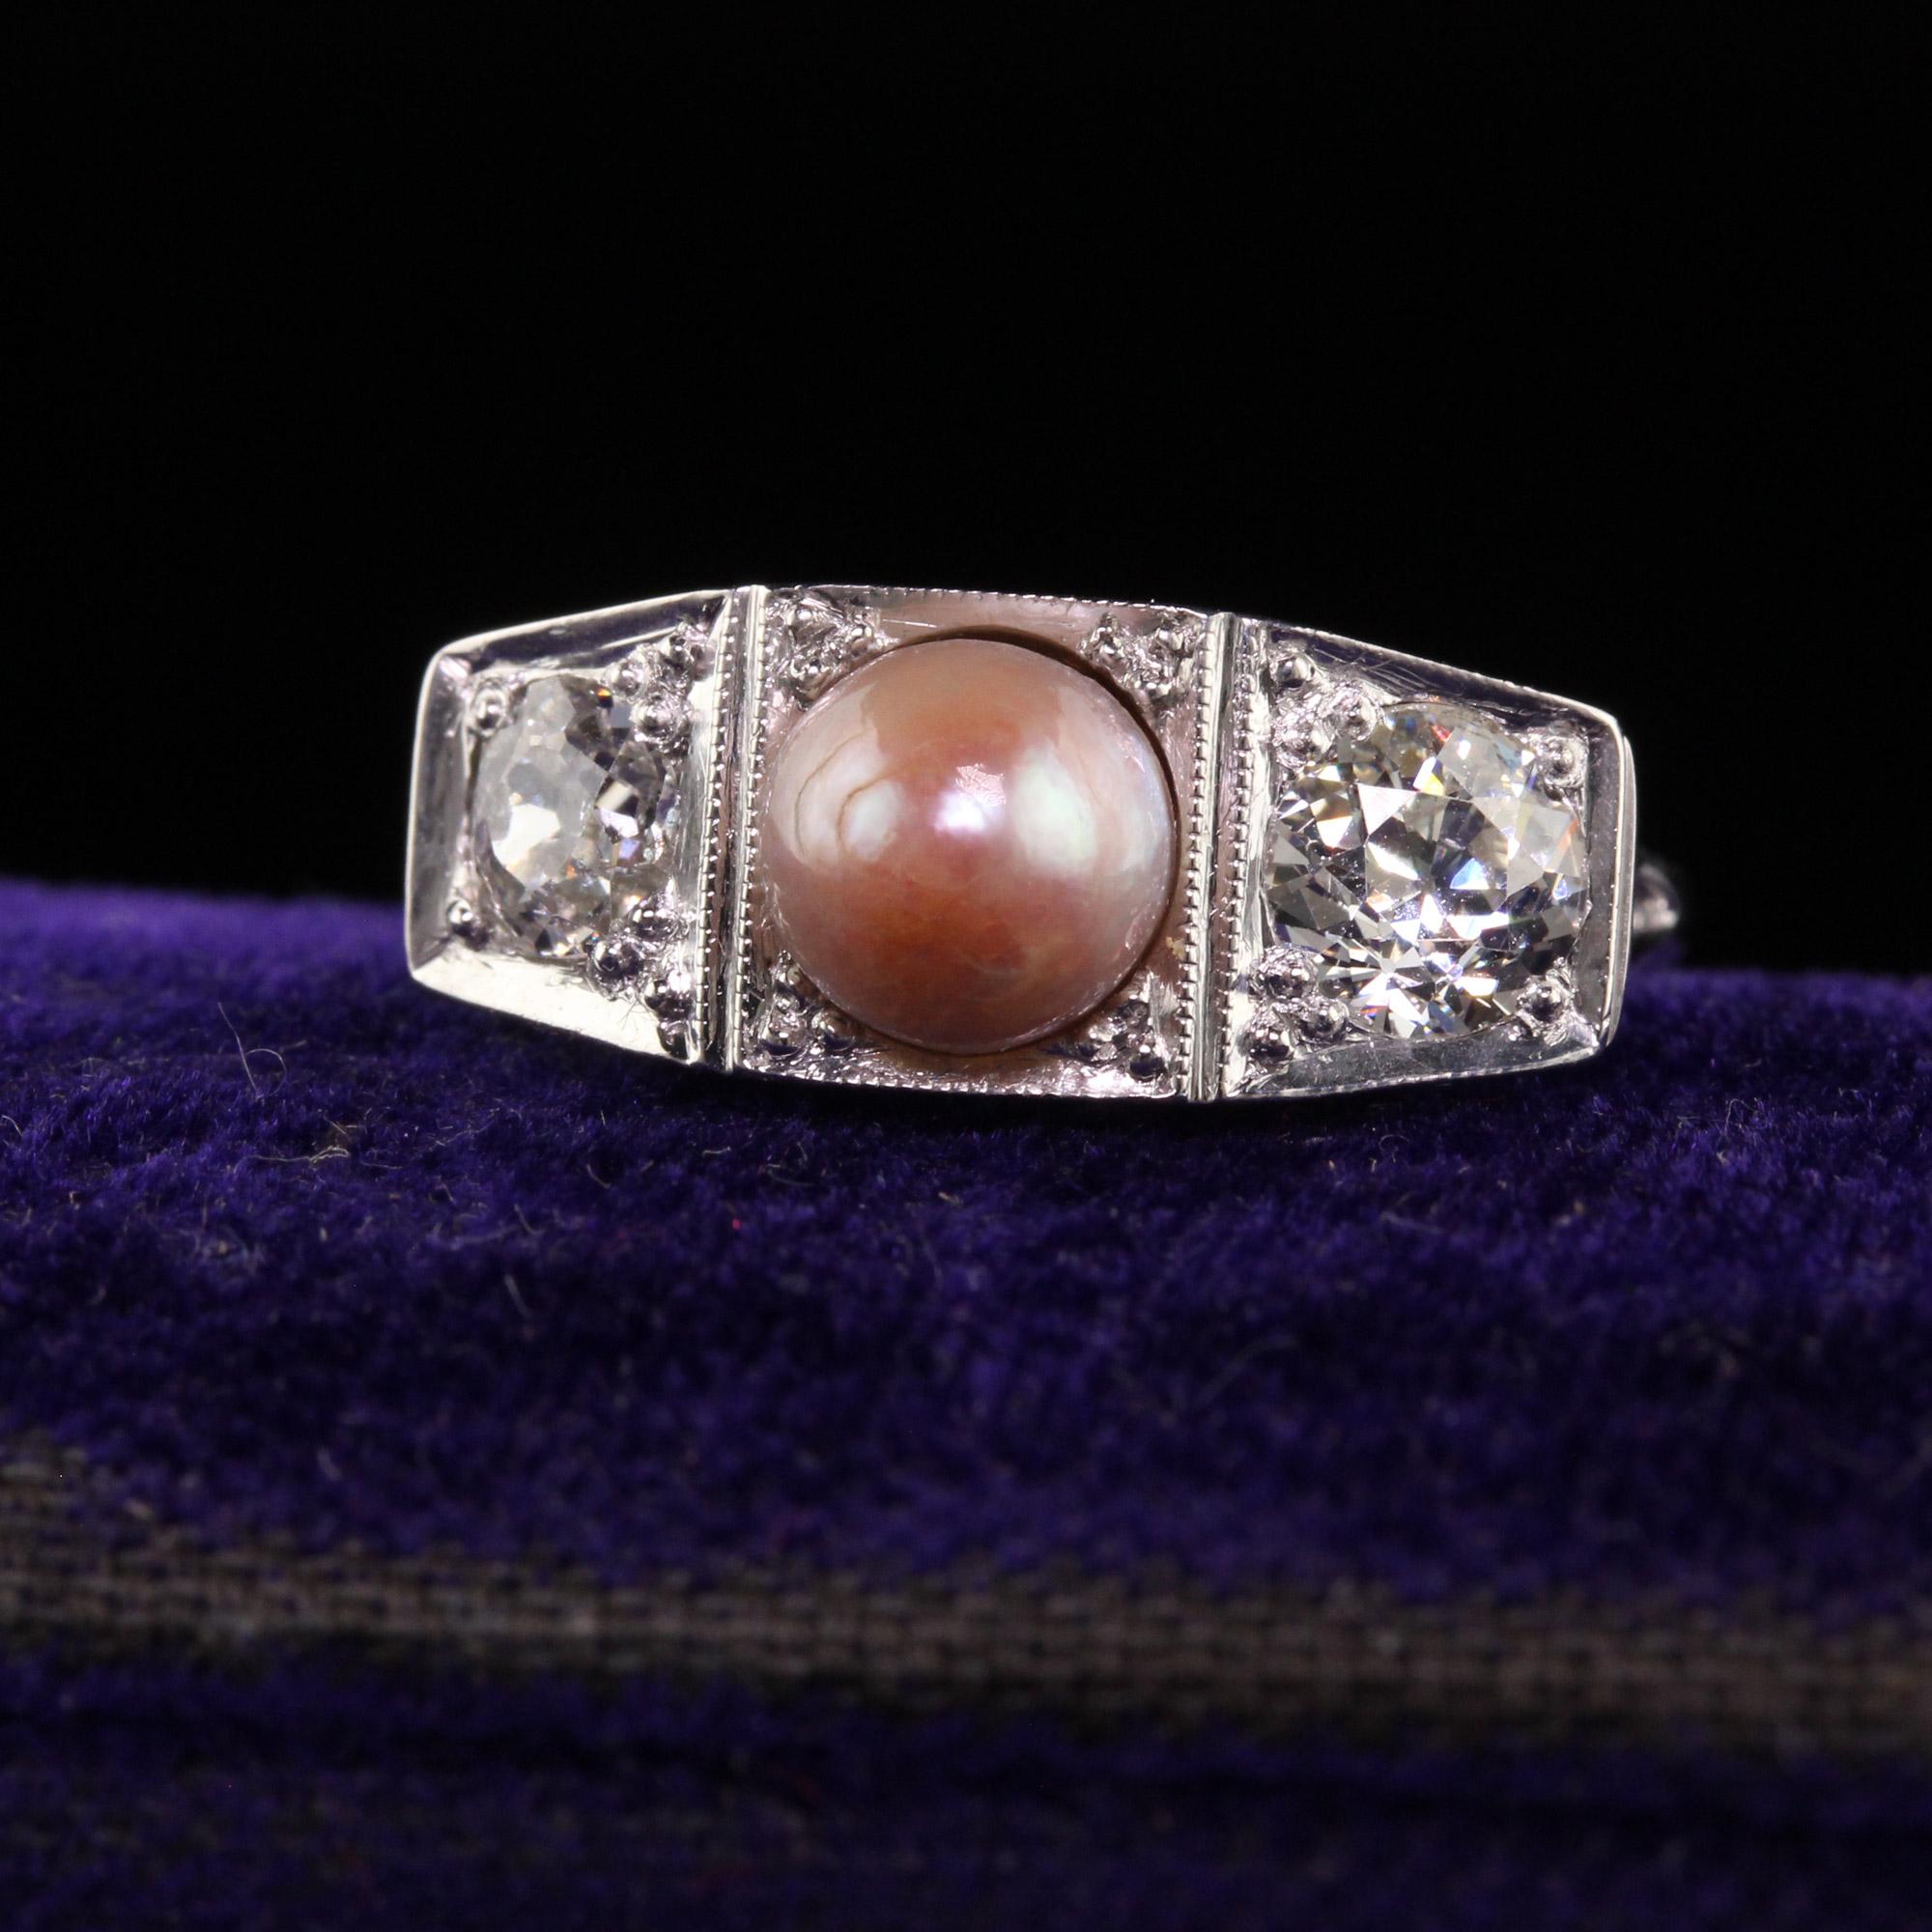 Beautiful Antique Art Deco 14K White Gold Old European Diamond and Pearl Three Stone Ring. This incredible ring is crafted in 14k white gold and platinum top. The center holds a natural pearl with a color that ranges from white to pink. The sides